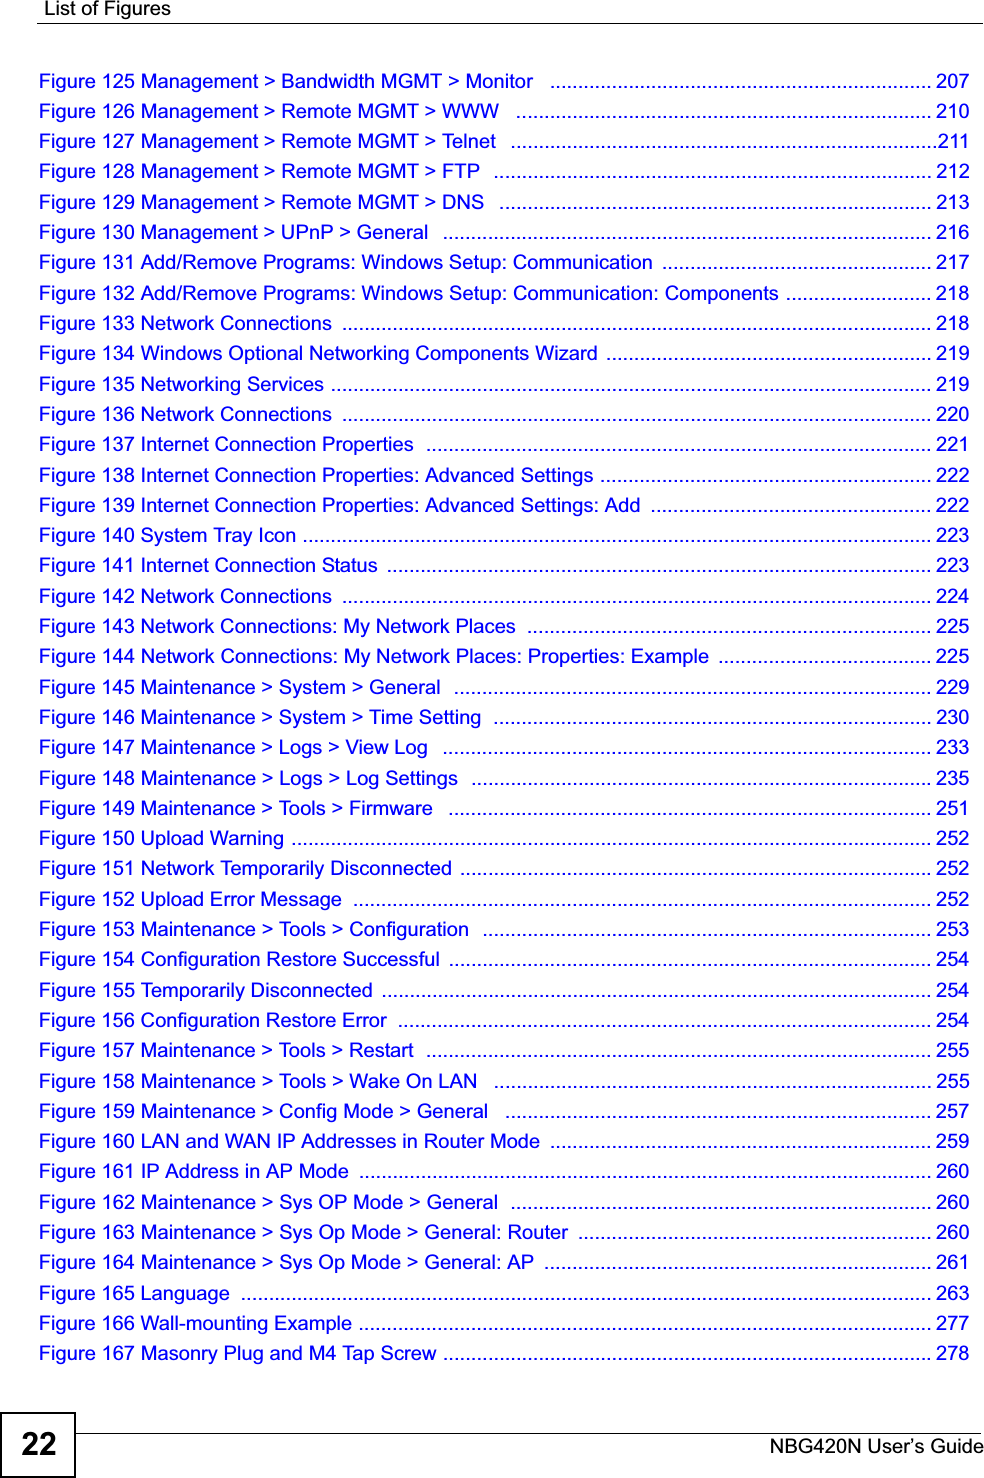 List of FiguresNBG420N User’s Guide22Figure 125 Management &gt; Bandwidth MGMT &gt; Monitor   .................................................................... 207Figure 126 Management &gt; Remote MGMT &gt; WWW   .......................................................................... 210Figure 127 Management &gt; Remote MGMT &gt; Telnet   ............................................................................211Figure 128 Management &gt; Remote MGMT &gt; FTP  .............................................................................. 212Figure 129 Management &gt; Remote MGMT &gt; DNS   ............................................................................. 213Figure 130 Management &gt; UPnP &gt; General   ....................................................................................... 216Figure 131 Add/Remove Programs: Windows Setup: Communication  ................................................ 217Figure 132 Add/Remove Programs: Windows Setup: Communication: Components .......................... 218Figure 133 Network Connections  ......................................................................................................... 218Figure 134 Windows Optional Networking Components Wizard  .......................................................... 219Figure 135 Networking Services ........................................................................................................... 219Figure 136 Network Connections  ......................................................................................................... 220Figure 137 Internet Connection Properties  .......................................................................................... 221Figure 138 Internet Connection Properties: Advanced Settings ........................................................... 222Figure 139 Internet Connection Properties: Advanced Settings: Add  .................................................. 222Figure 140 System Tray Icon ................................................................................................................ 223Figure 141 Internet Connection Status  ................................................................................................. 223Figure 142 Network Connections  ......................................................................................................... 224Figure 143 Network Connections: My Network Places  ........................................................................ 225Figure 144 Network Connections: My Network Places: Properties: Example  ...................................... 225Figure 145 Maintenance &gt; System &gt; General  .....................................................................................229Figure 146 Maintenance &gt; System &gt; Time Setting  .............................................................................. 230Figure 147 Maintenance &gt; Logs &gt; View Log   ....................................................................................... 233Figure 148 Maintenance &gt; Logs &gt; Log Settings  ..................................................................................235Figure 149 Maintenance &gt; Tools &gt; Firmware   ...................................................................................... 251Figure 150 Upload Warning .................................................................................................................. 252Figure 151 Network Temporarily Disconnected ....................................................................................252Figure 152 Upload Error Message  ....................................................................................................... 252Figure 153 Maintenance &gt; Tools &gt; Configuration  ................................................................................253Figure 154 Configuration Restore Successful  ...................................................................................... 254Figure 155 Temporarily Disconnected  .................................................................................................. 254Figure 156 Configuration Restore Error  ............................................................................................... 254Figure 157 Maintenance &gt; Tools &gt; Restart  .......................................................................................... 255Figure 158 Maintenance &gt; Tools &gt; Wake On LAN   .............................................................................. 255Figure 159 Maintenance &gt; Config Mode &gt; General   ............................................................................ 257Figure 160 LAN and WAN IP Addresses in Router Mode  .................................................................... 259Figure 161 IP Address in AP Mode  ...................................................................................................... 260Figure 162 Maintenance &gt; Sys OP Mode &gt; General  ........................................................................... 260Figure 163 Maintenance &gt; Sys Op Mode &gt; General: Router  ............................................................... 260Figure 164 Maintenance &gt; Sys Op Mode &gt; General: AP  ..................................................................... 261Figure 165 Language  ........................................................................................................................... 263Figure 166 Wall-mounting Example ...................................................................................................... 277Figure 167 Masonry Plug and M4 Tap Screw .......................................................................................278